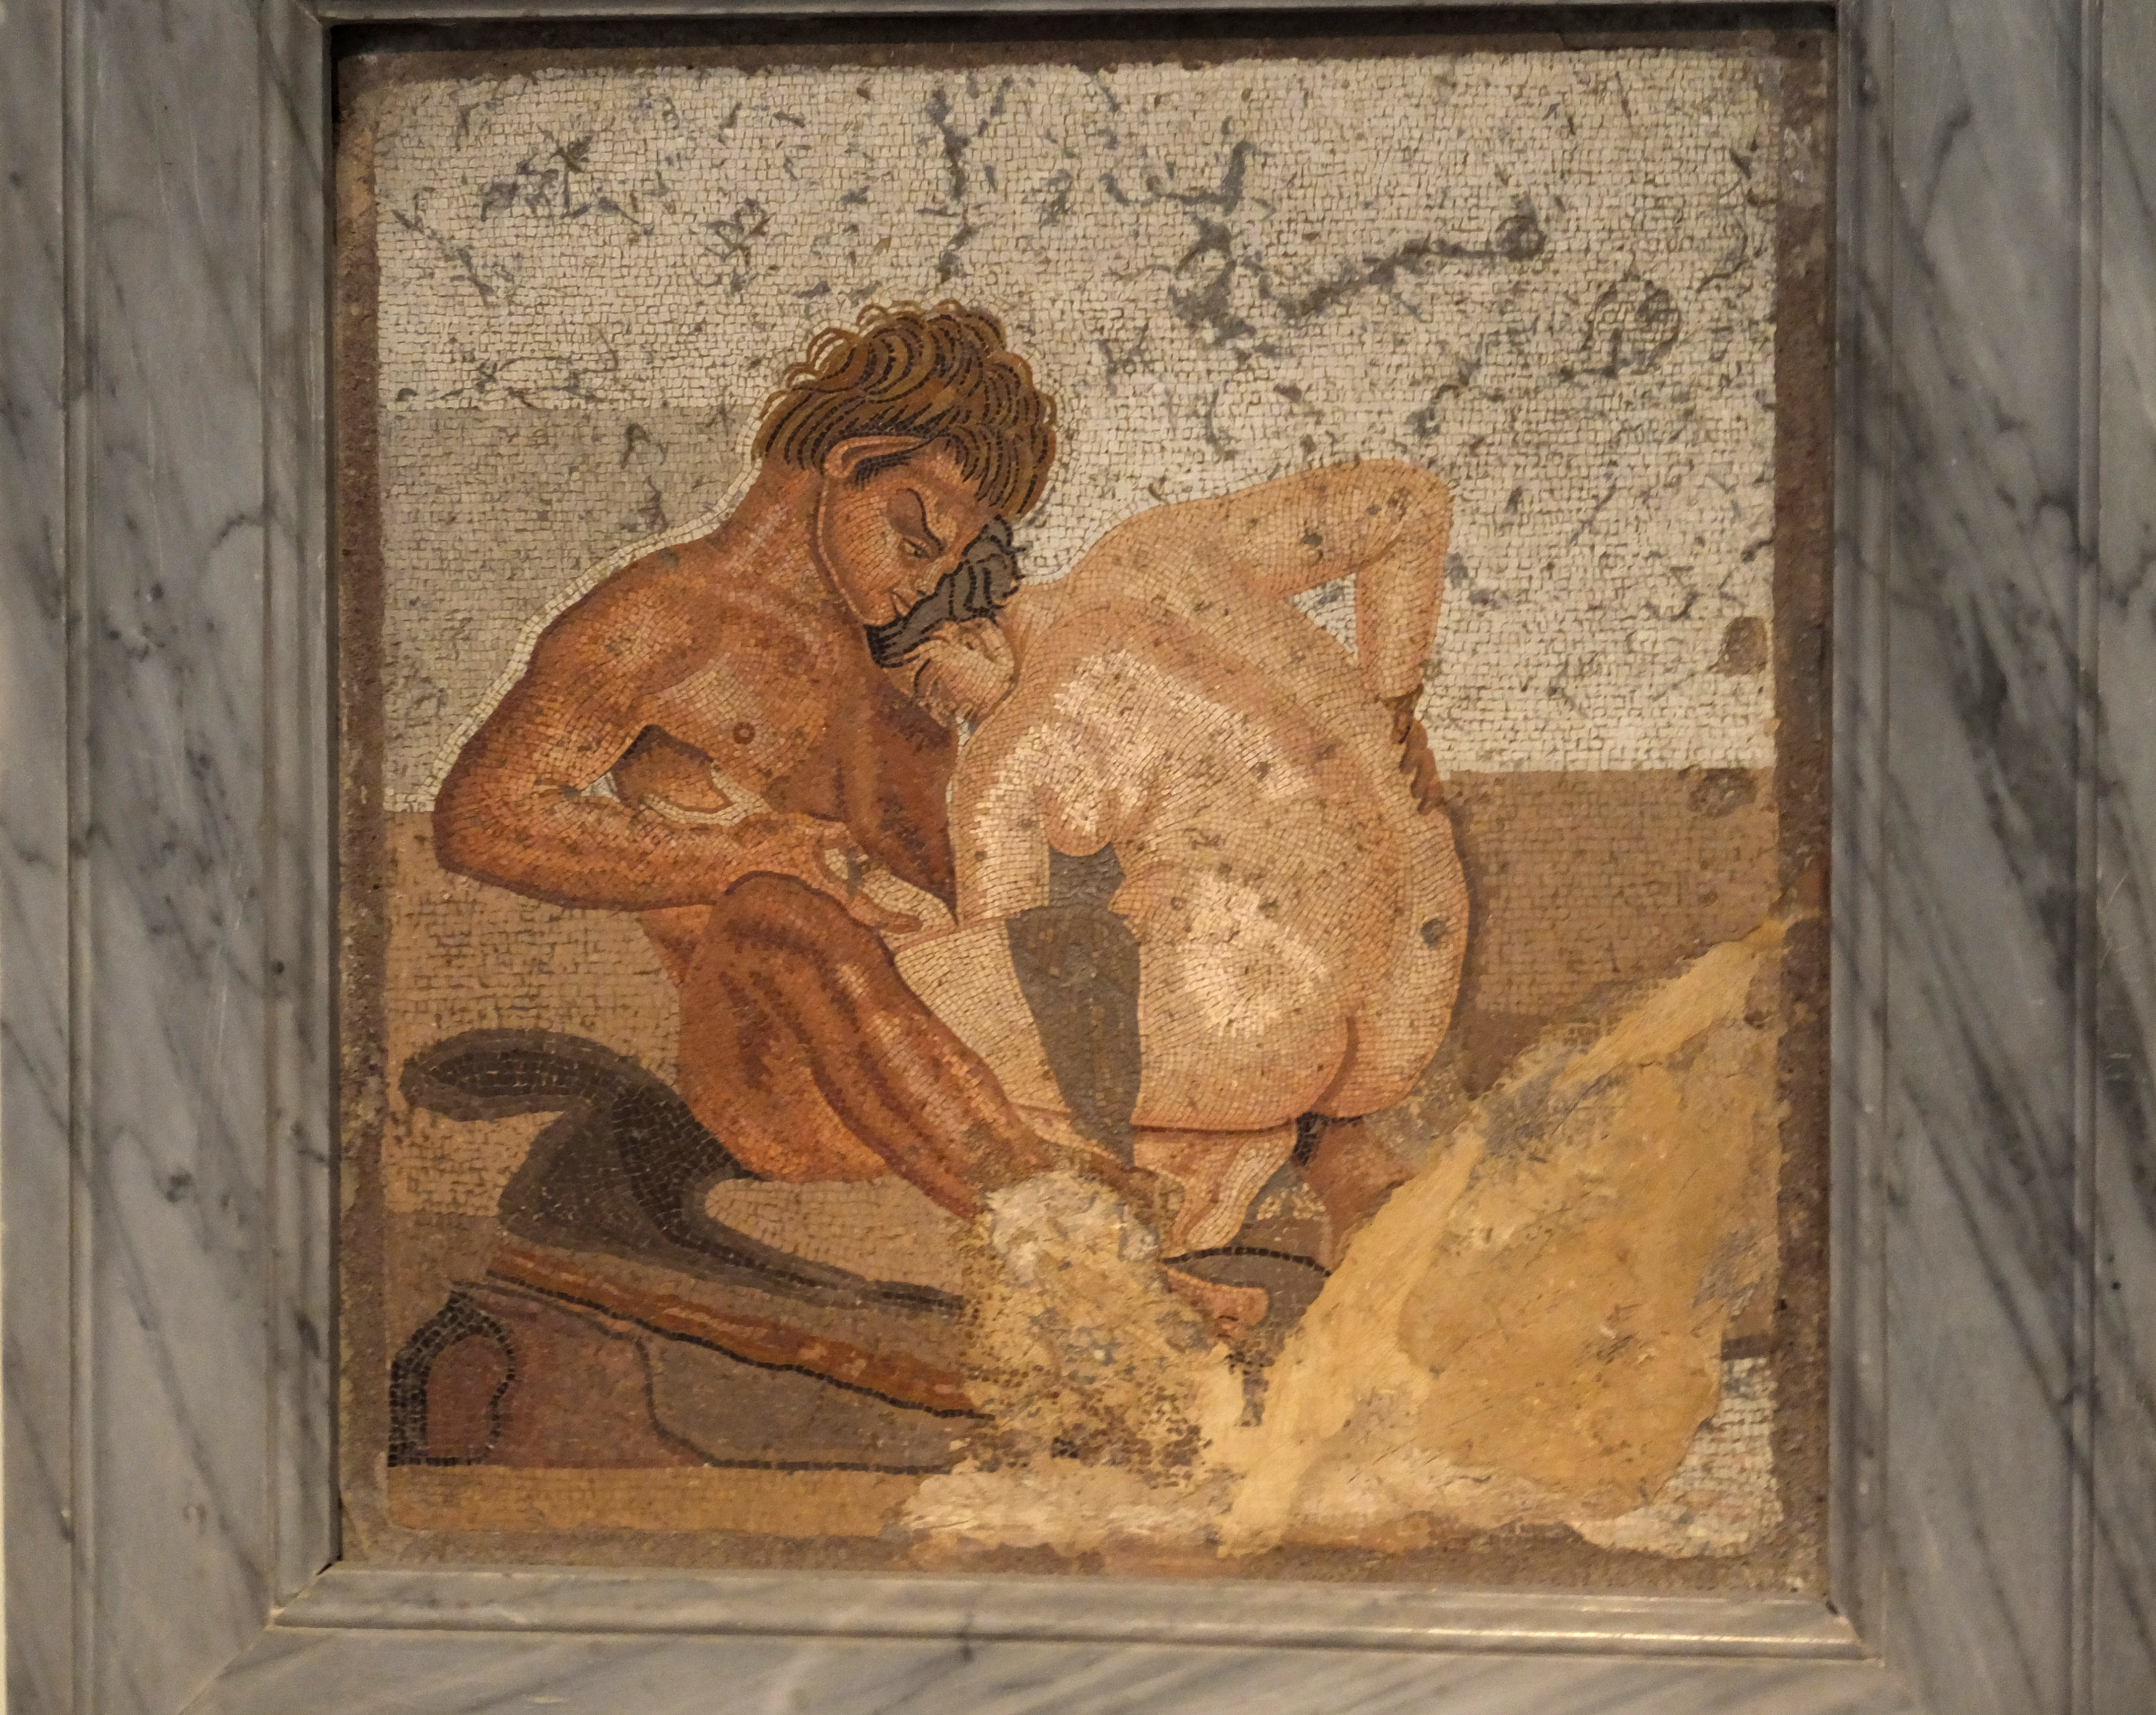 Extreme Weird Painful Anal Destruction - Sexuality in ancient Rome - Wikipedia